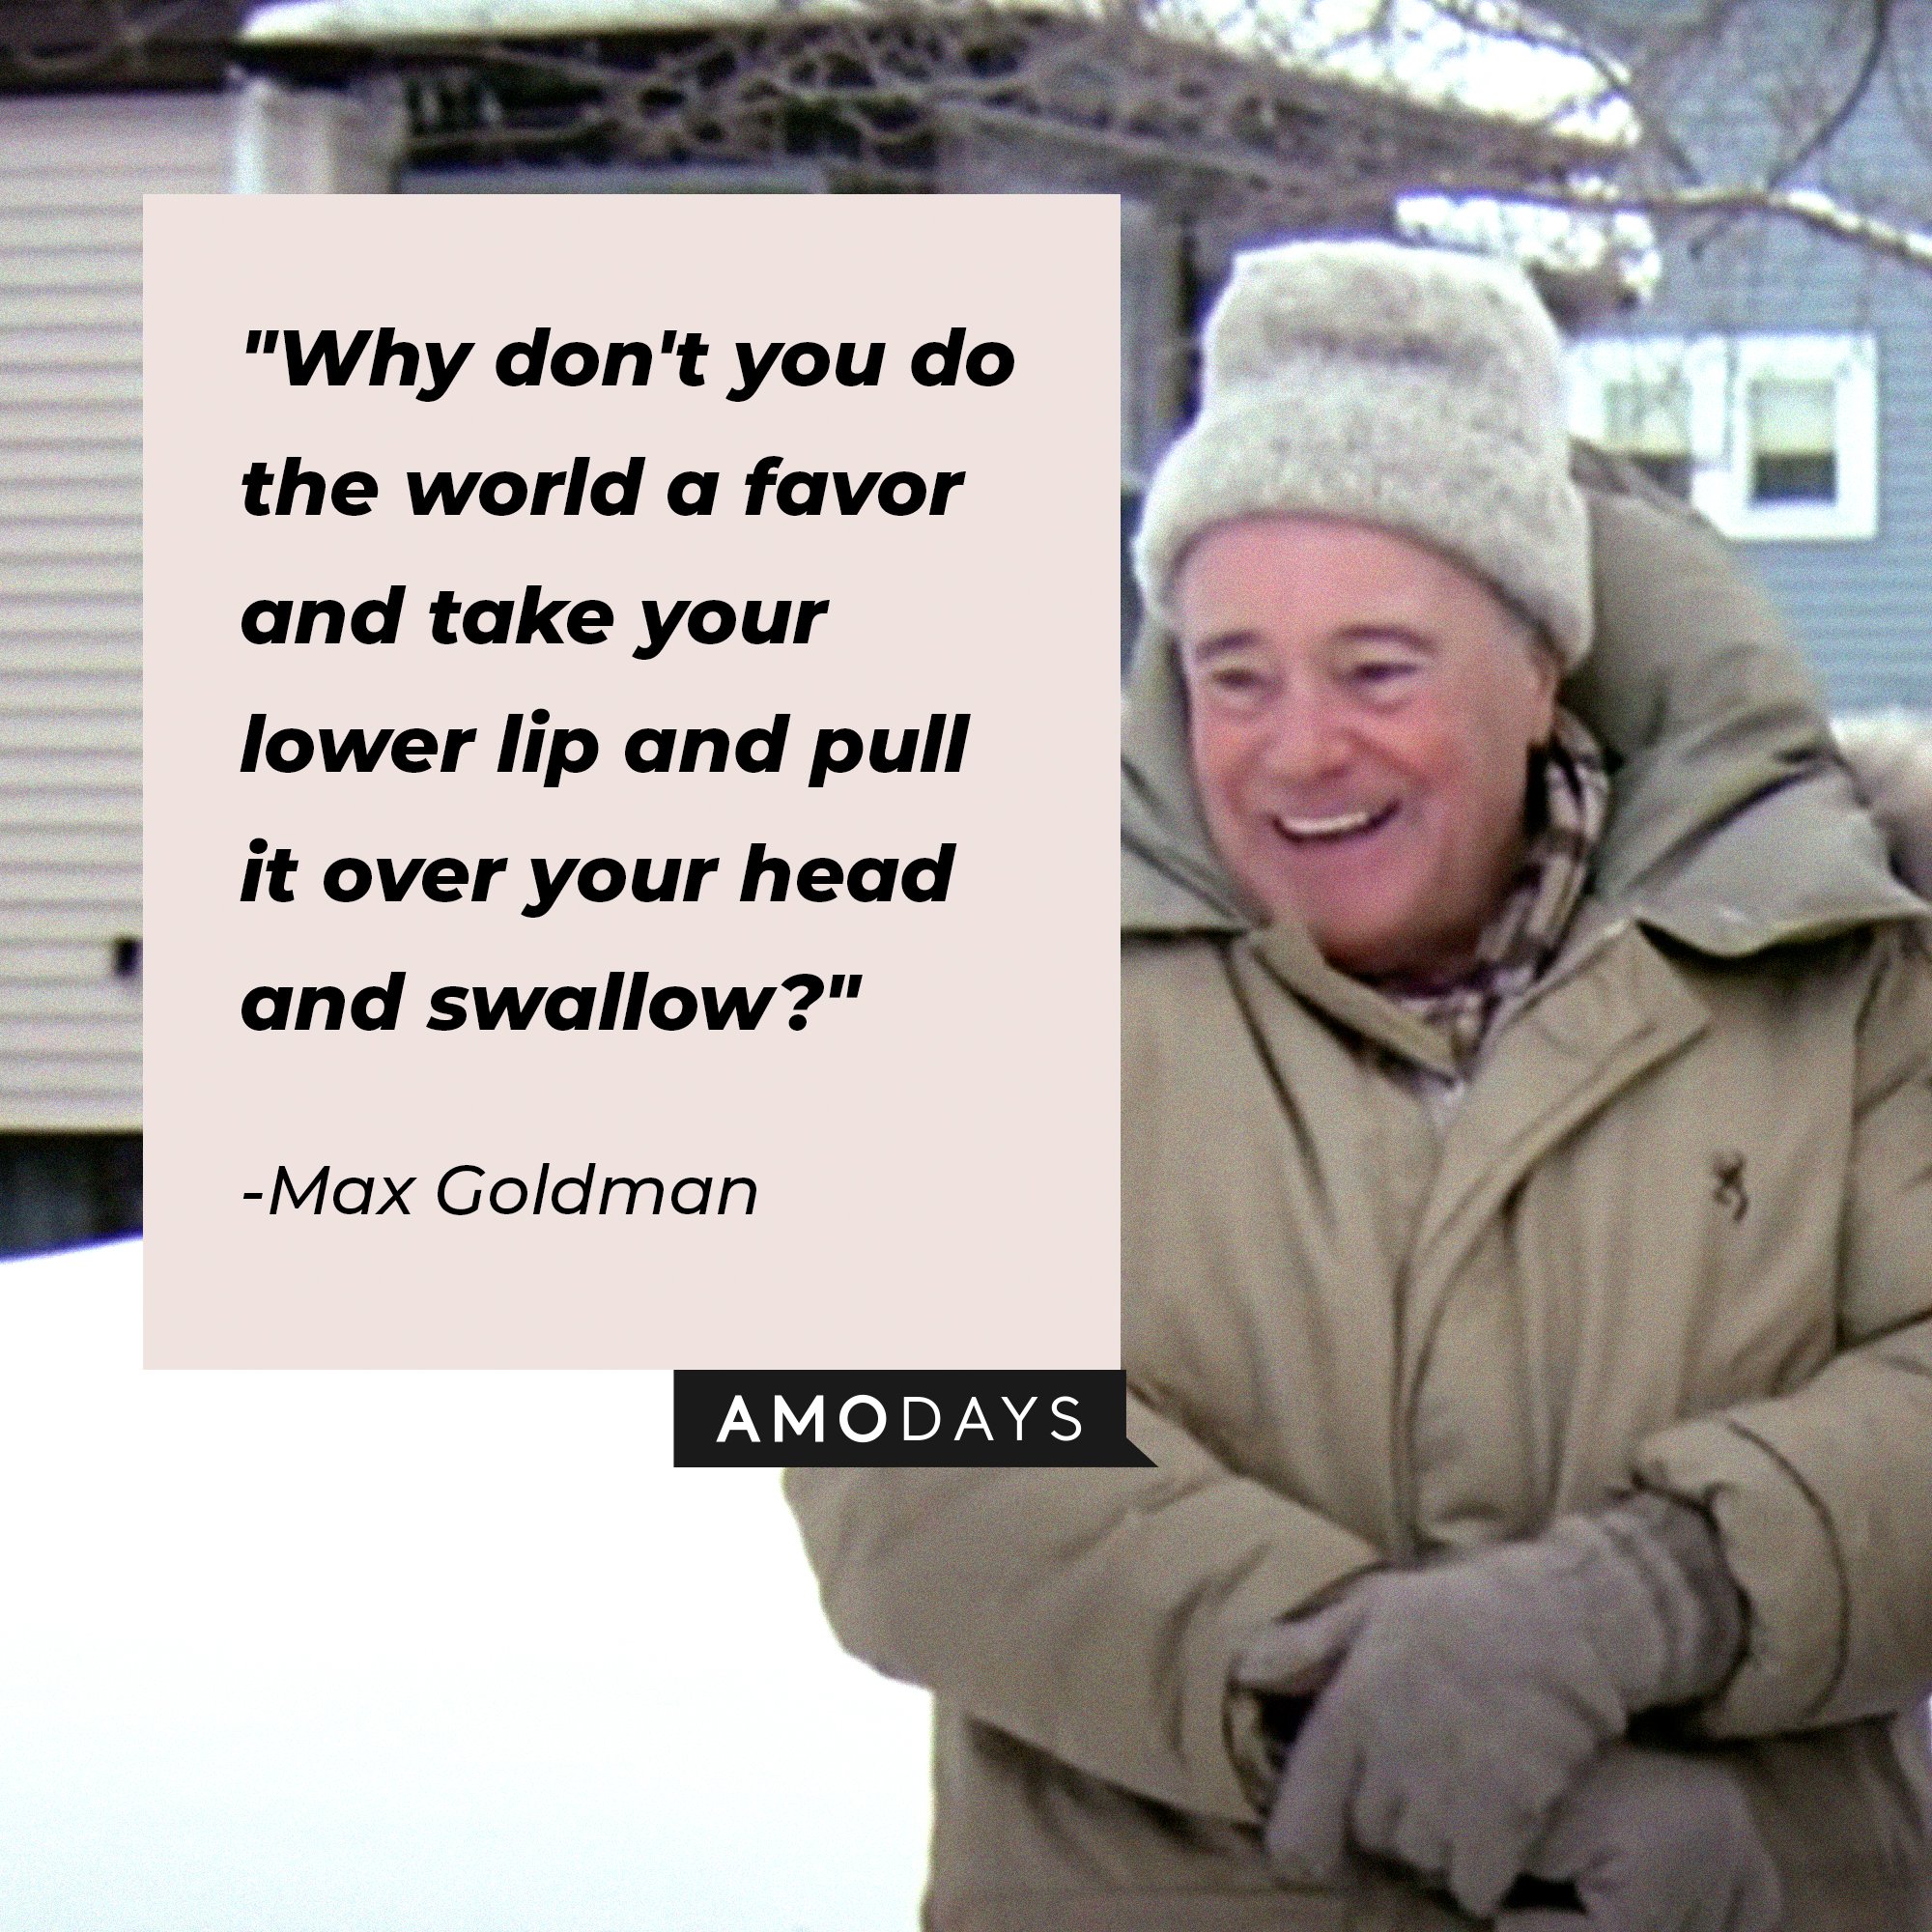 Max Goldman’s quote: "Why don't you do the world a favor and take your lower lip and pull it over your head and swallow?" | Image: AmoDays